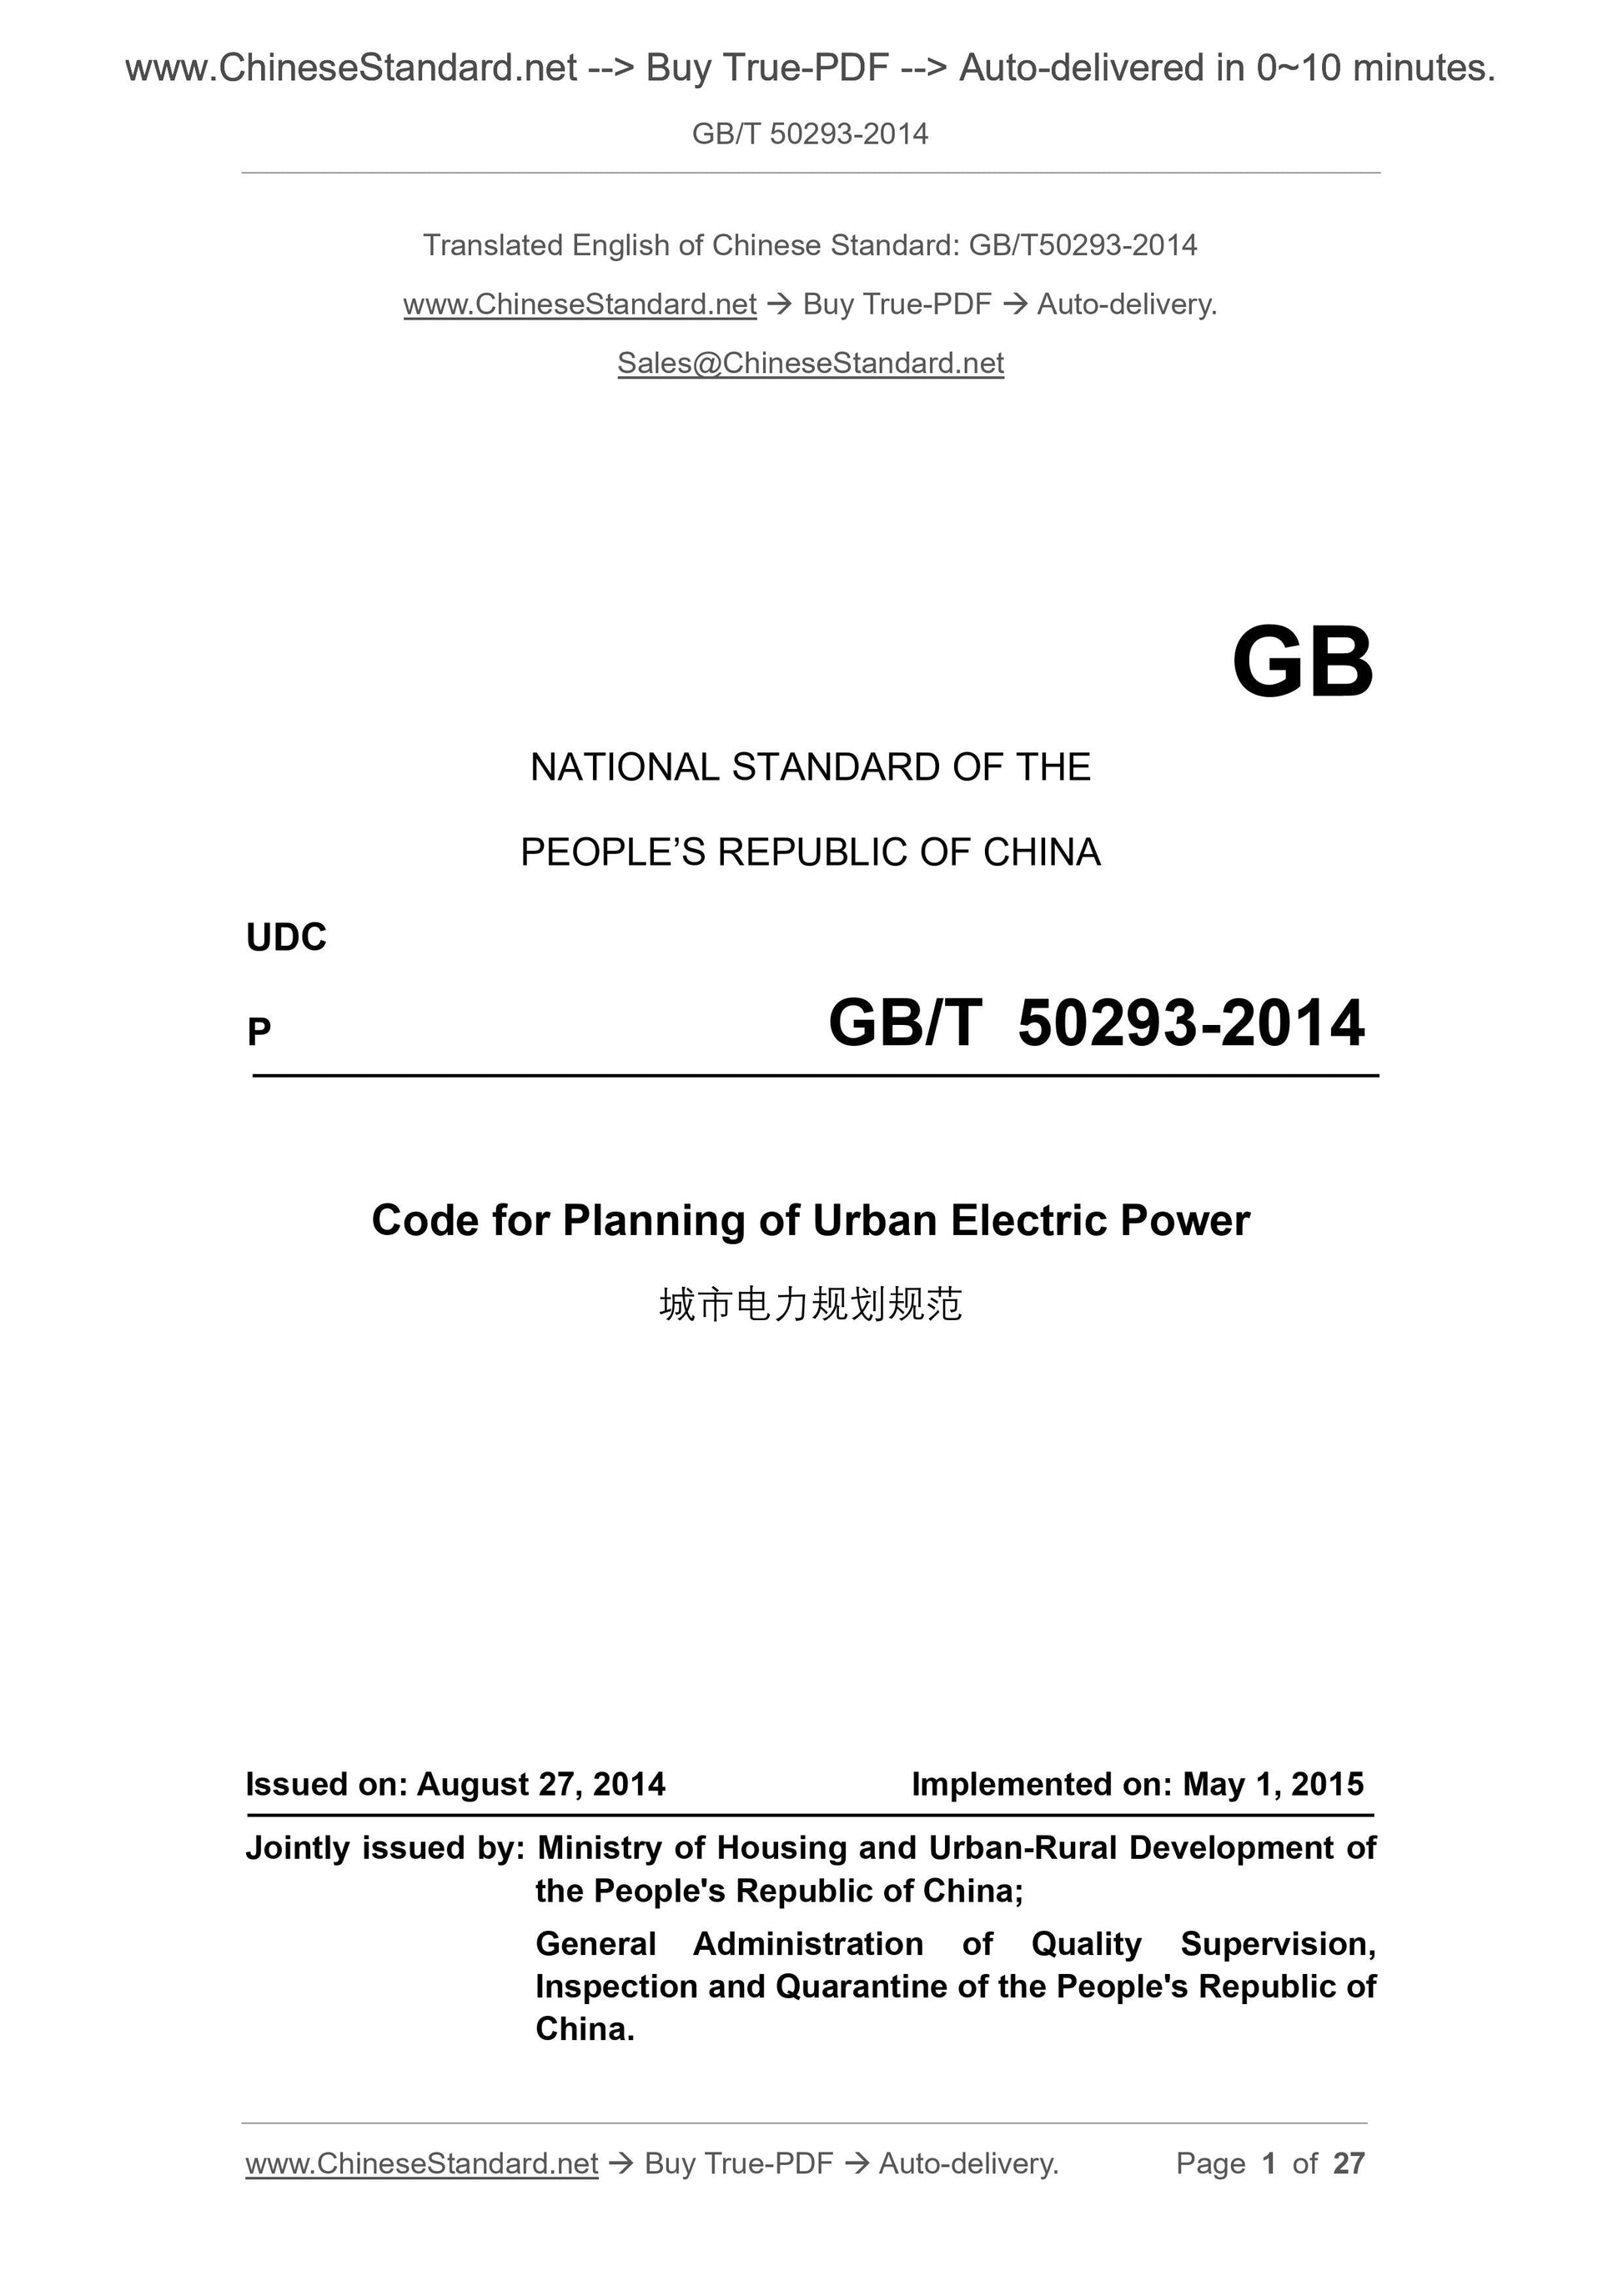 GB/T 50293-2014 Page 1